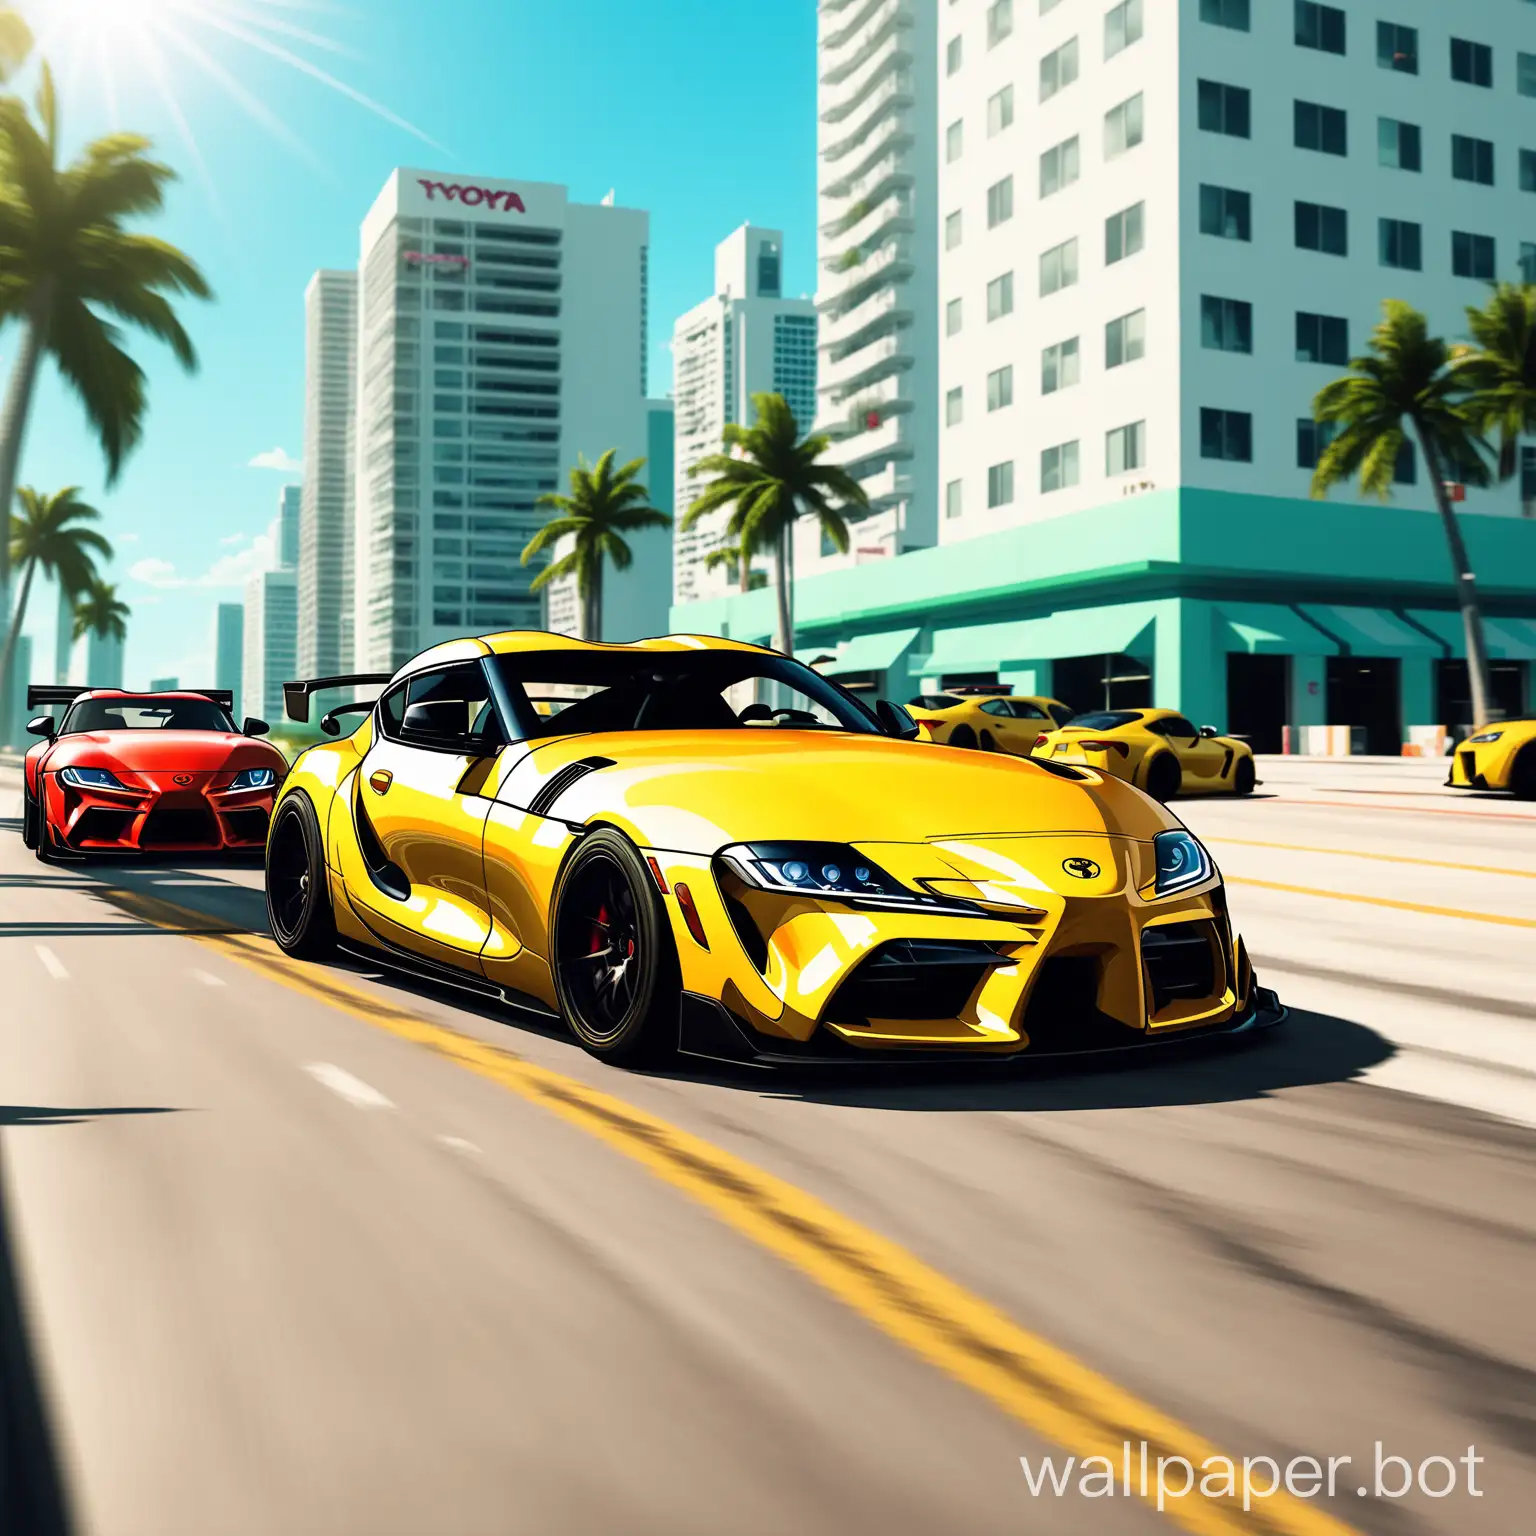 A yellow Toyota Supra with a wide body kit, racing on the streets of Miami. Buildings are in the background and it is a sunny day. The artwork is in the style of a Grand Theft Auto game with high resolution and vibrant, bold colors. The composition is cinematic.